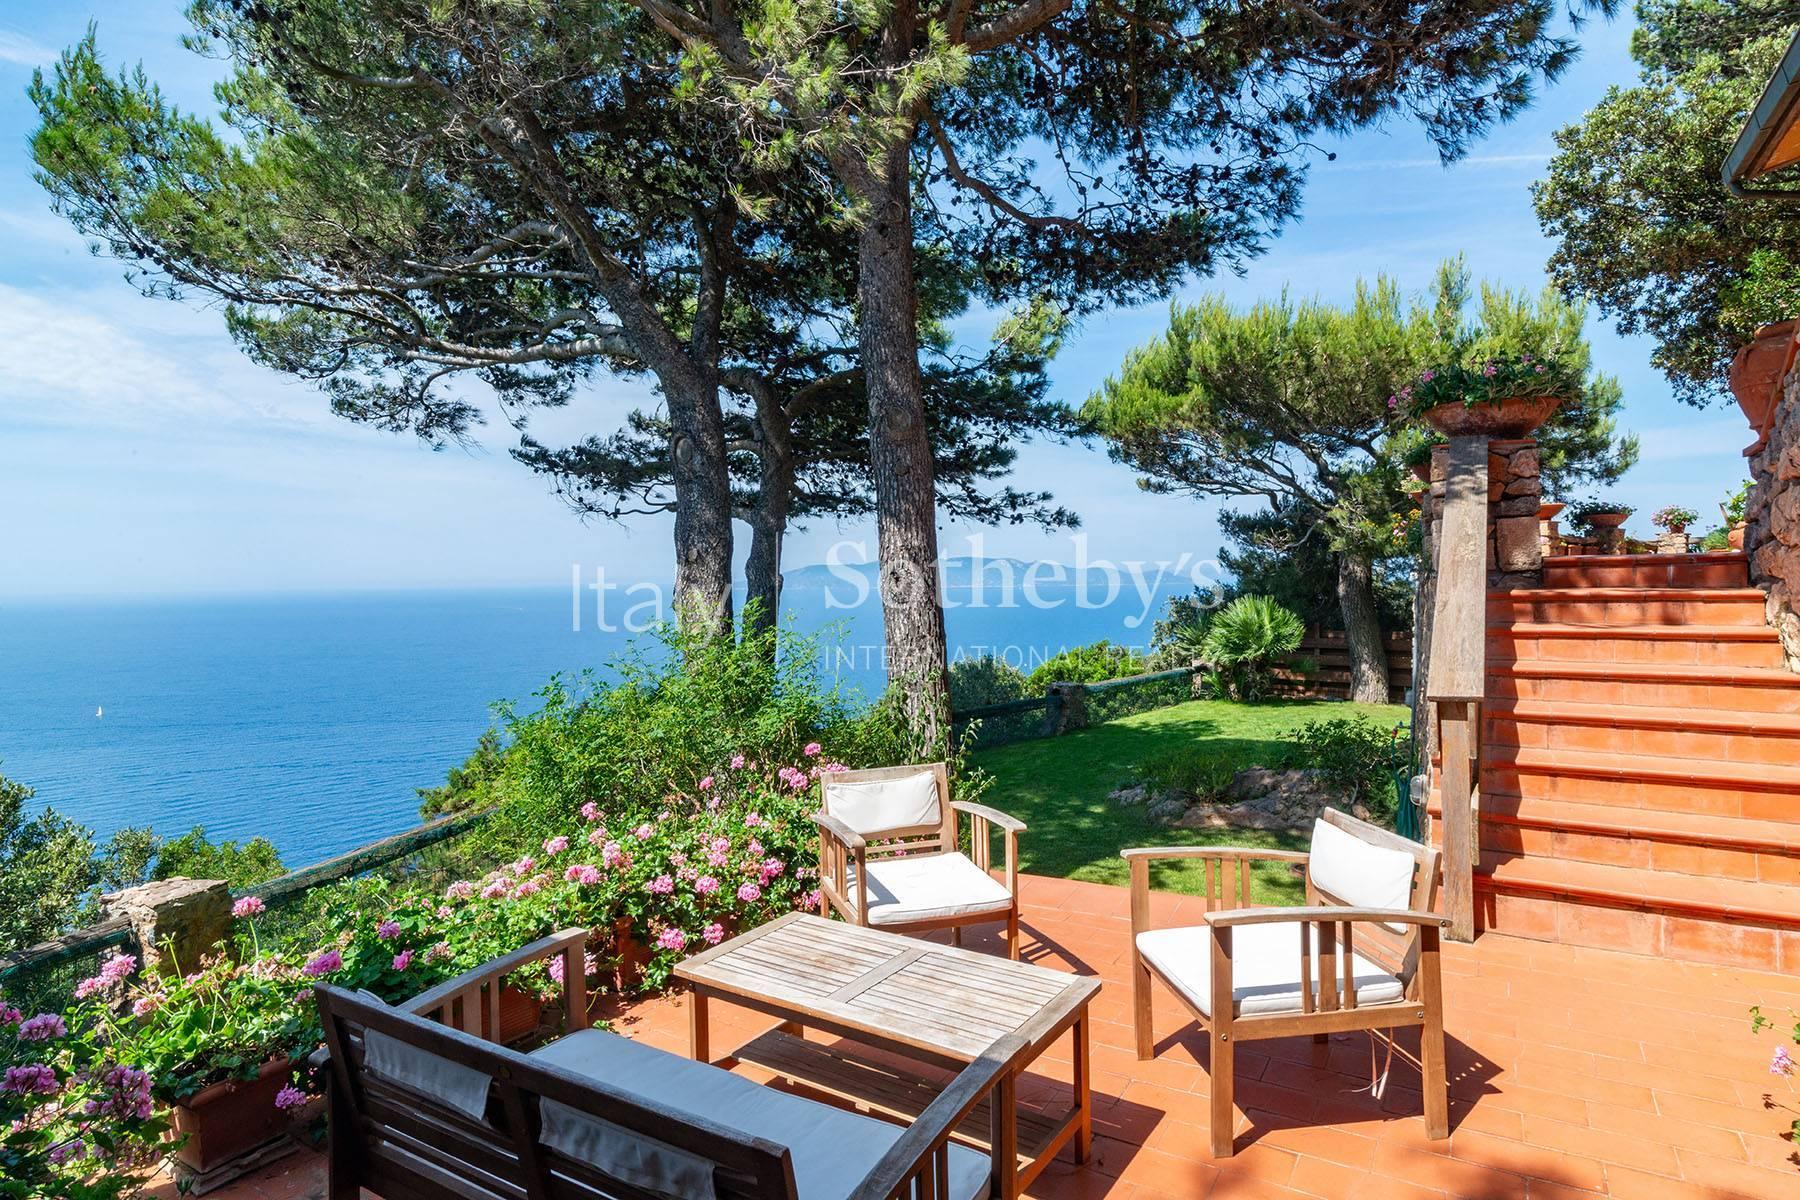 Villa with magnificent sea view and panoramic terraces in Monte Argentario - 5